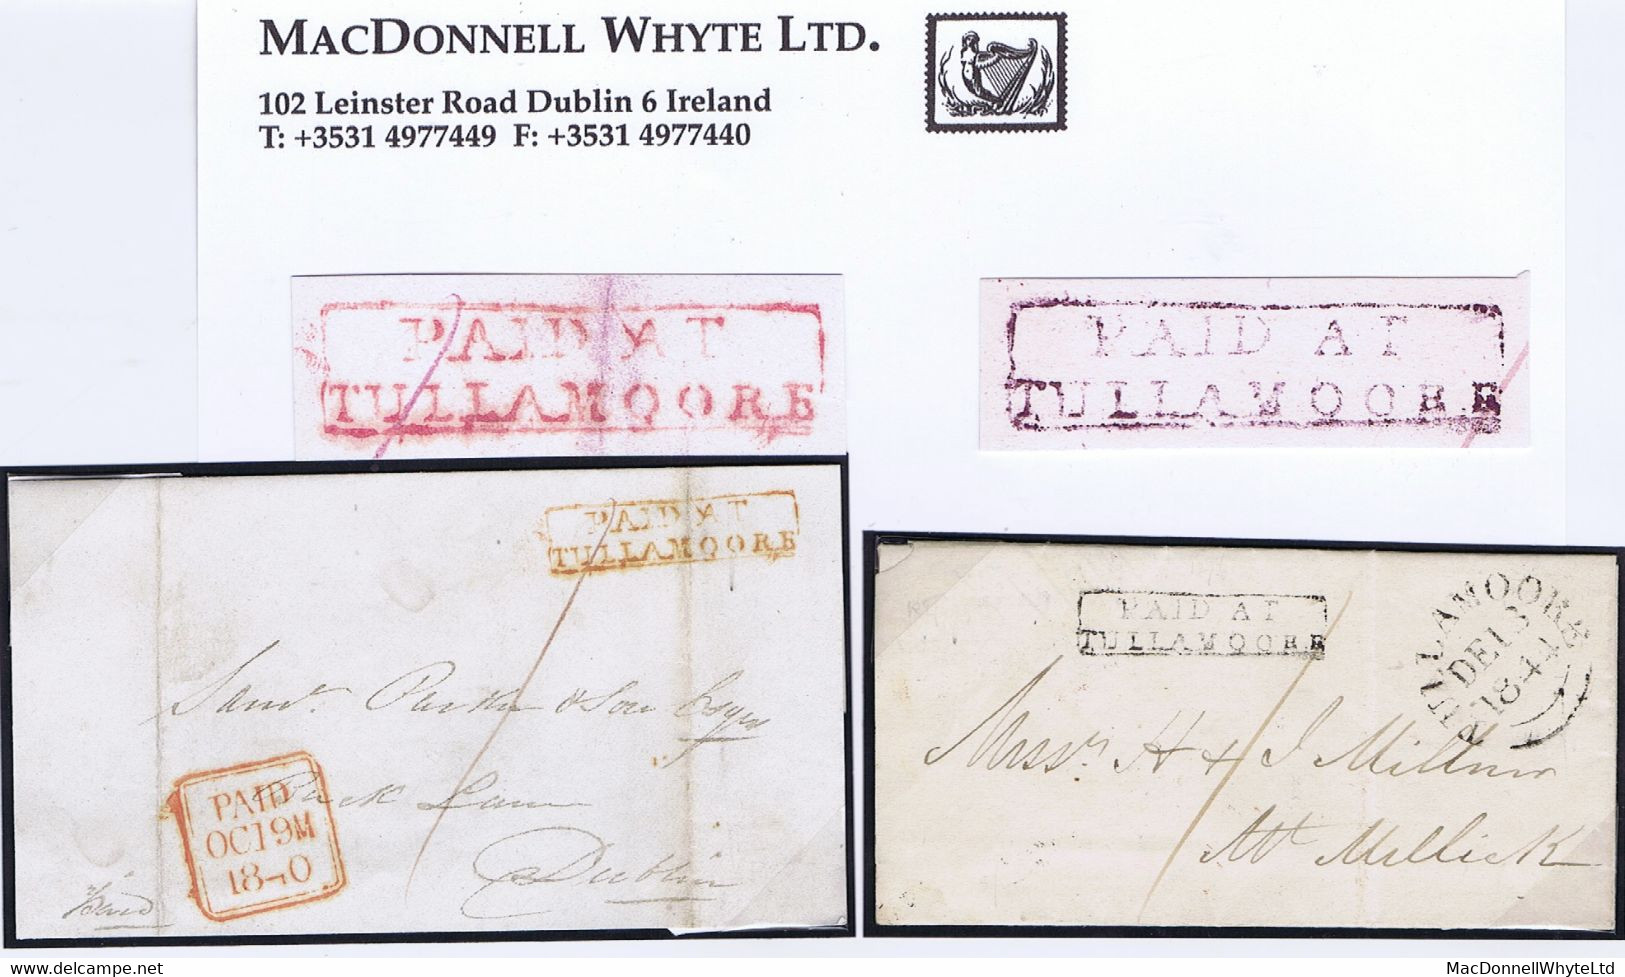 Ireland Offaly Uniform Penny Post Boxed PAID AT/TULLAMORE In Red 1840 And In Black 1844 On Front Or Cover - Prephilately